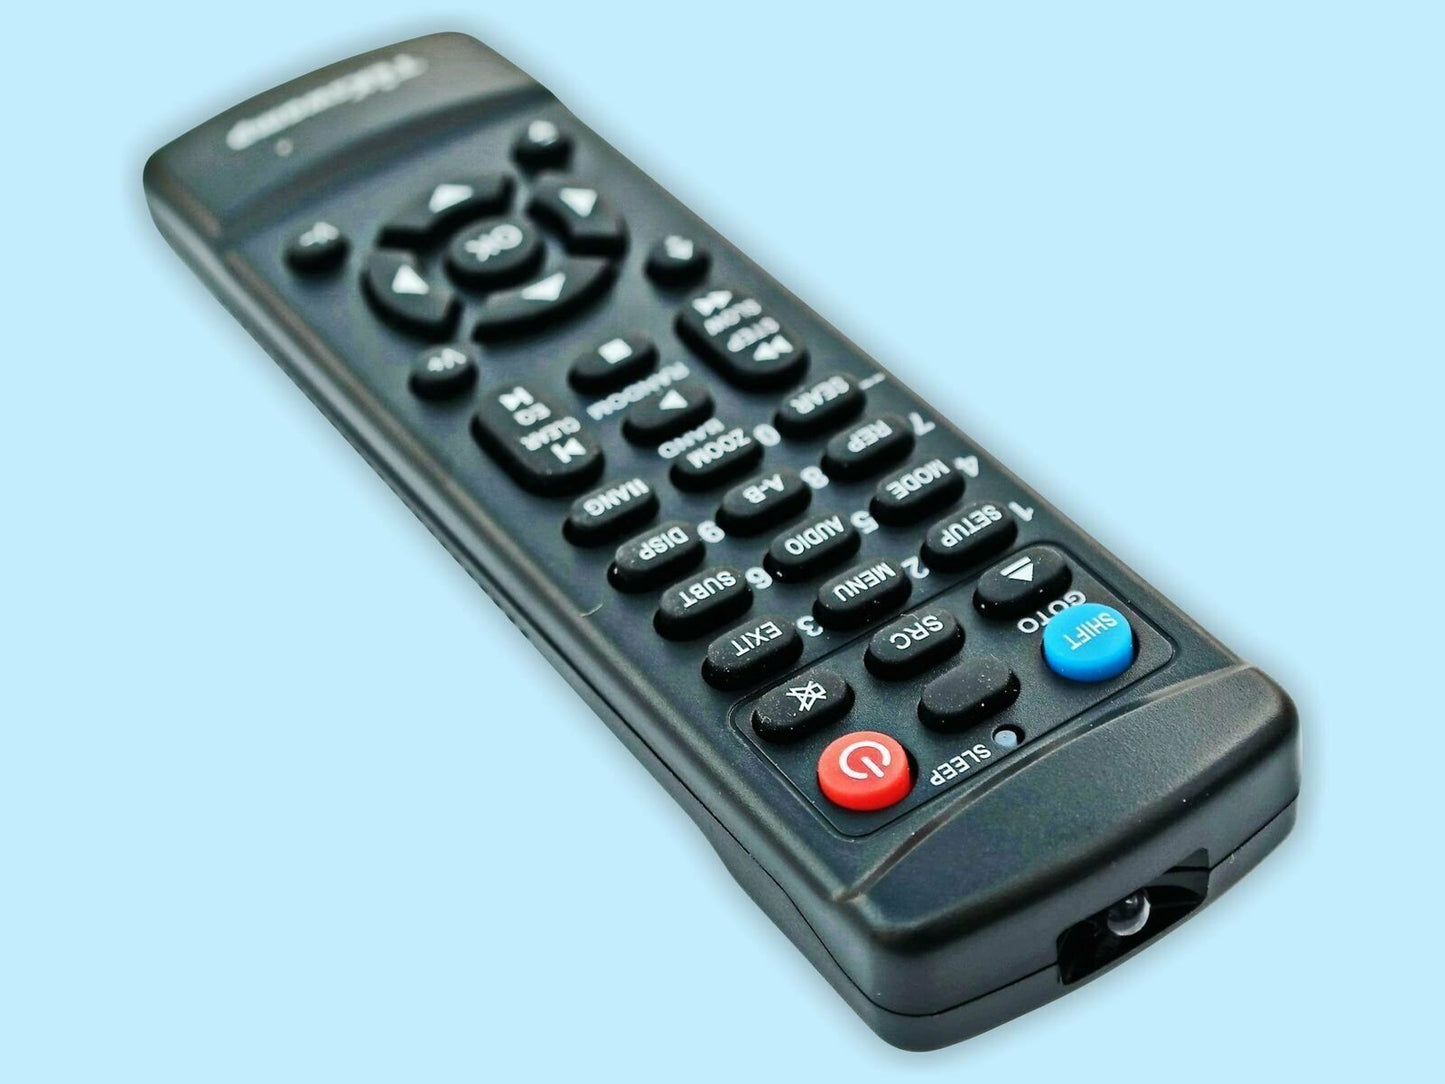 NEW Projector Remote Control for BenQ MW571 MW519 MS521 TW523 MX618ST MS619ST